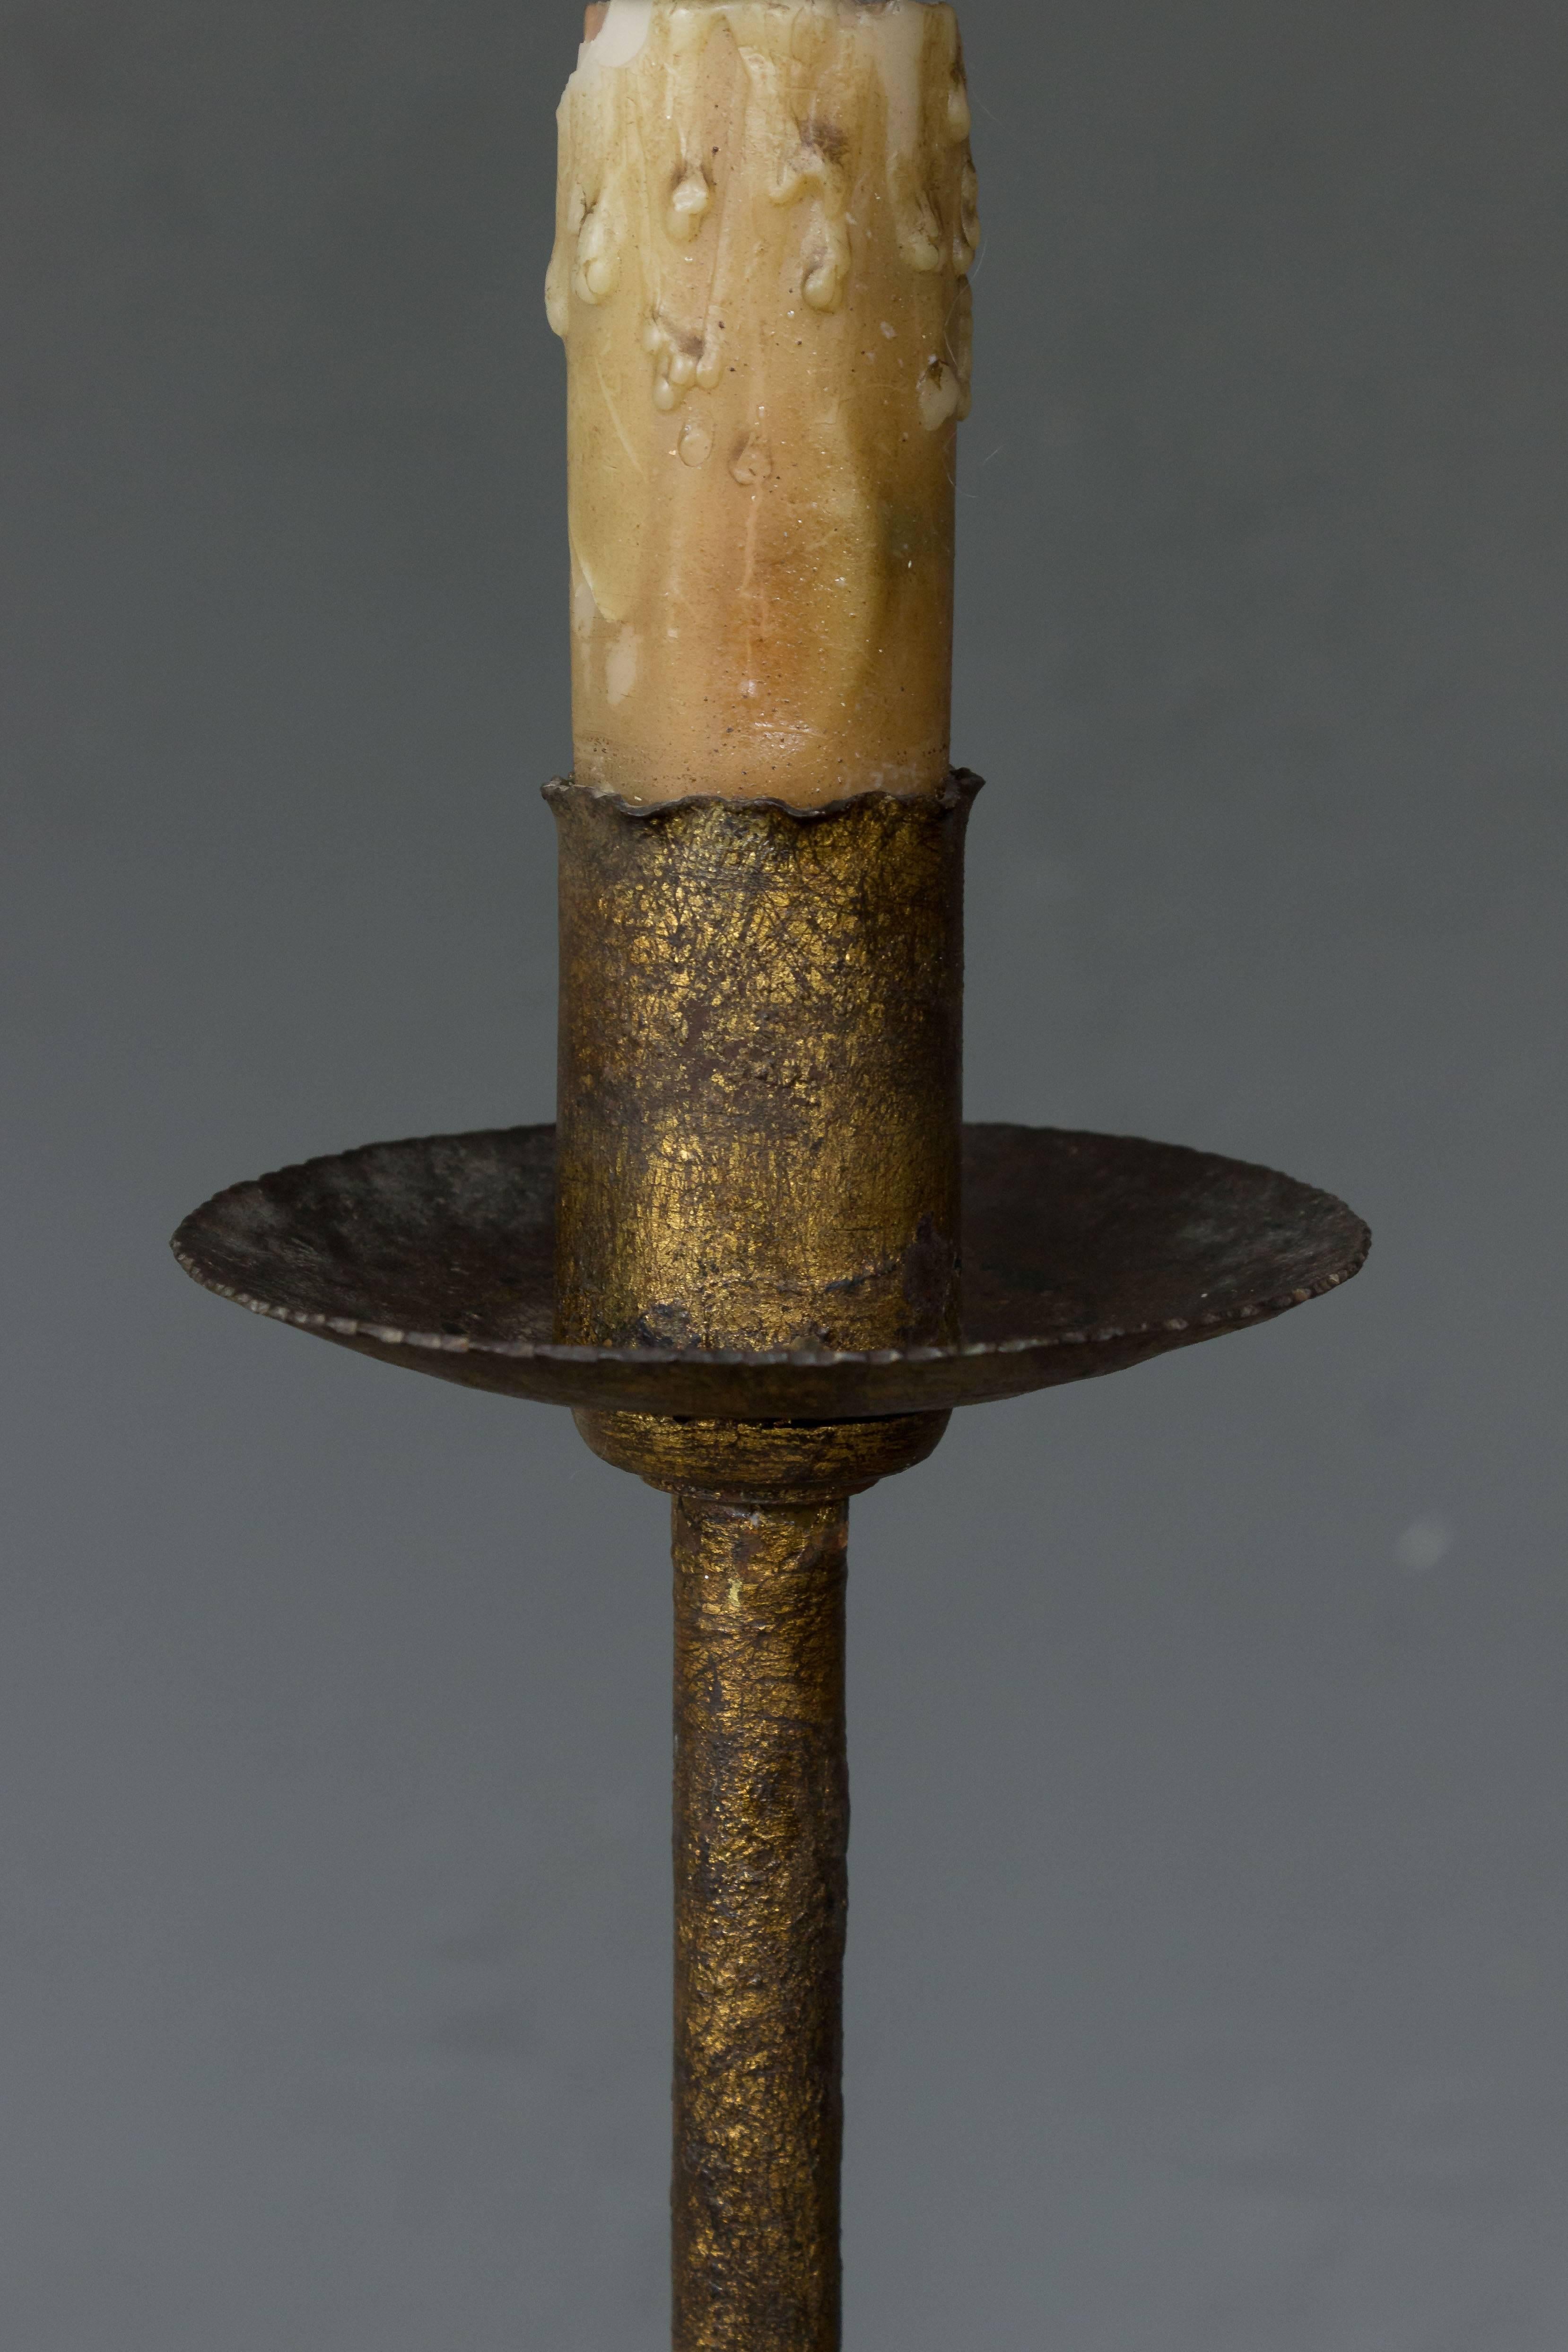 Spanish Iron Floor Lamp on a Tripod Base with a Dark Gold Patina